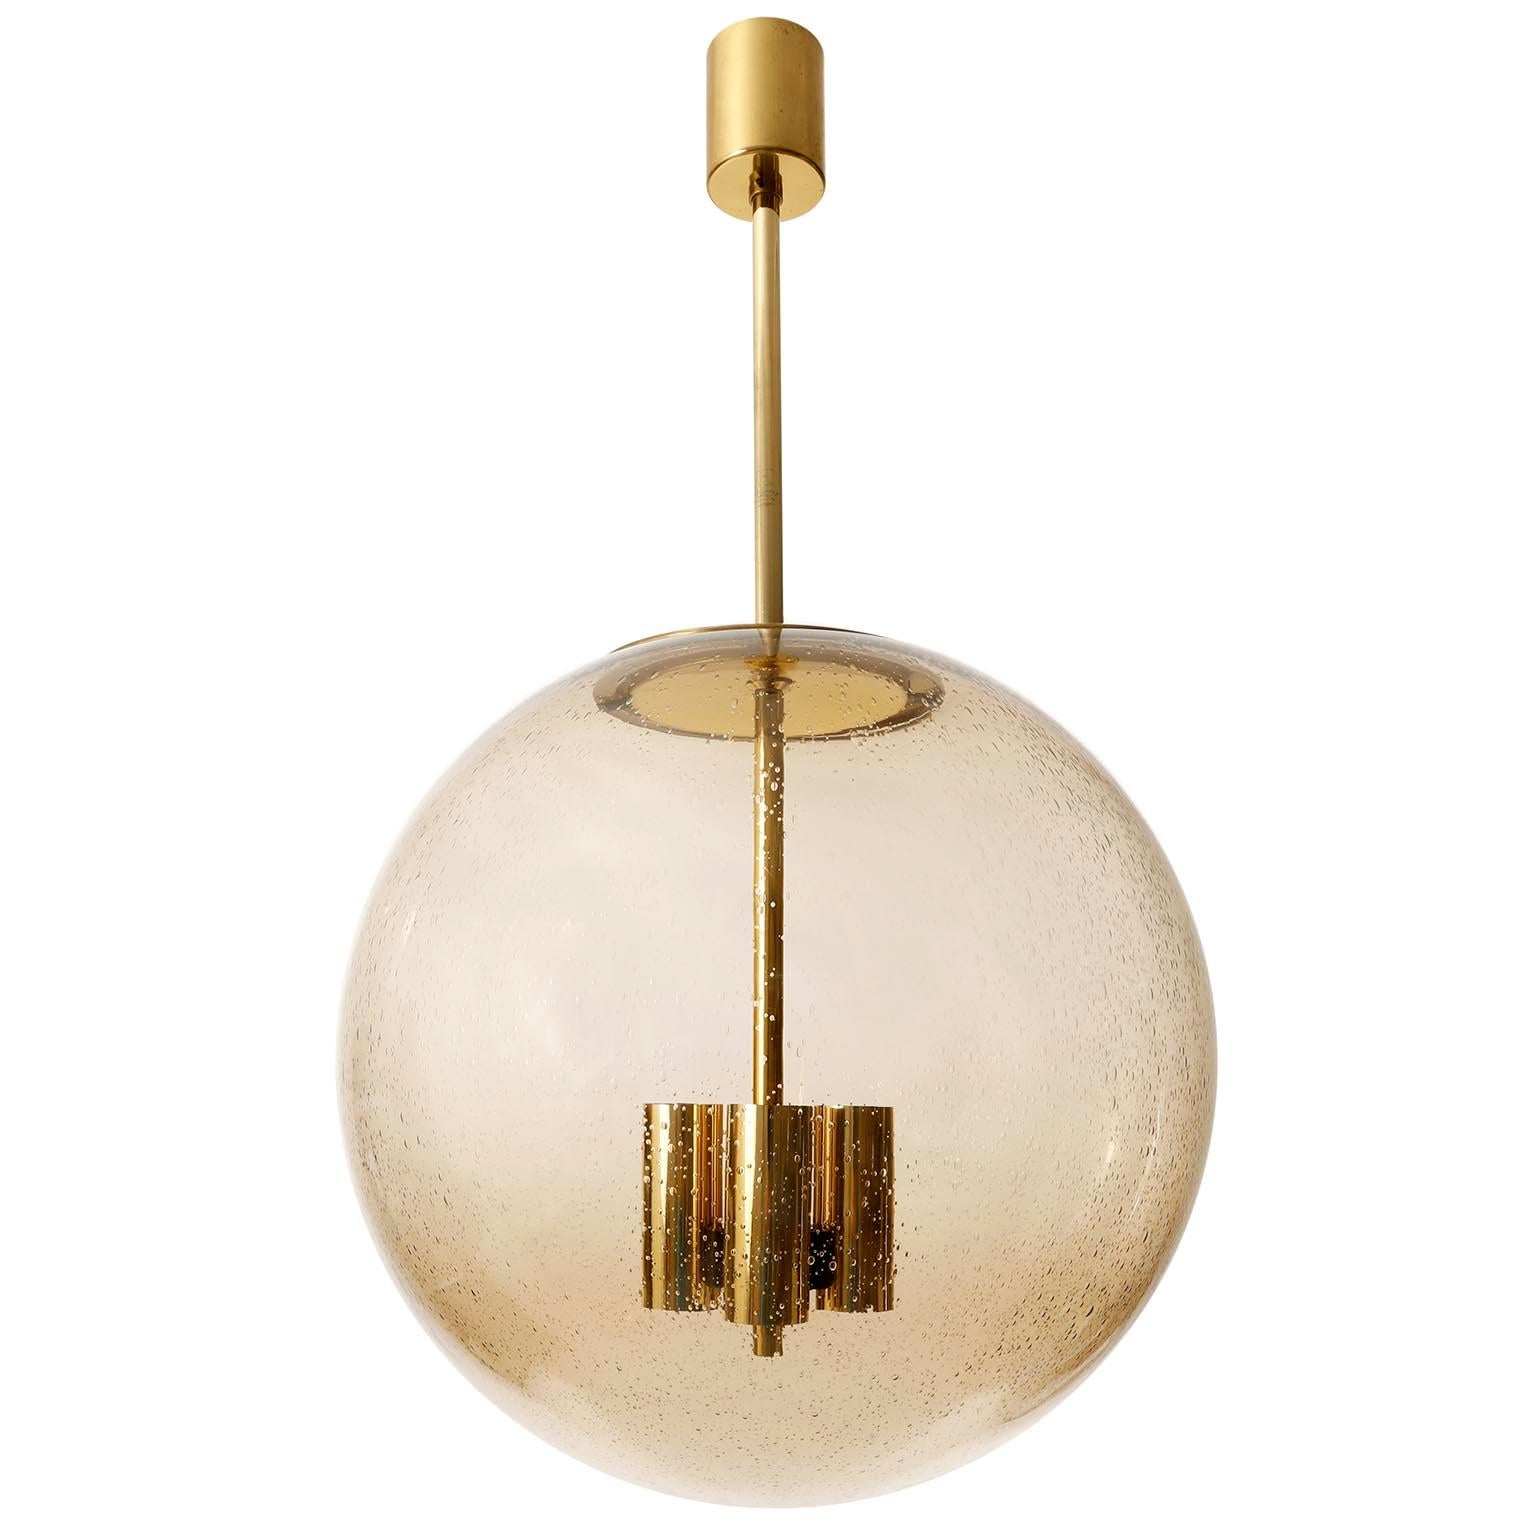 One of six extra large brass and hand blown glass globe pendants model 'P 197' by Glashütte Limburg, Germany, manufactured in midcentury, circa 1970.
The suspension, rod and canopy are made of polished brass. The seeded glass globe with many air